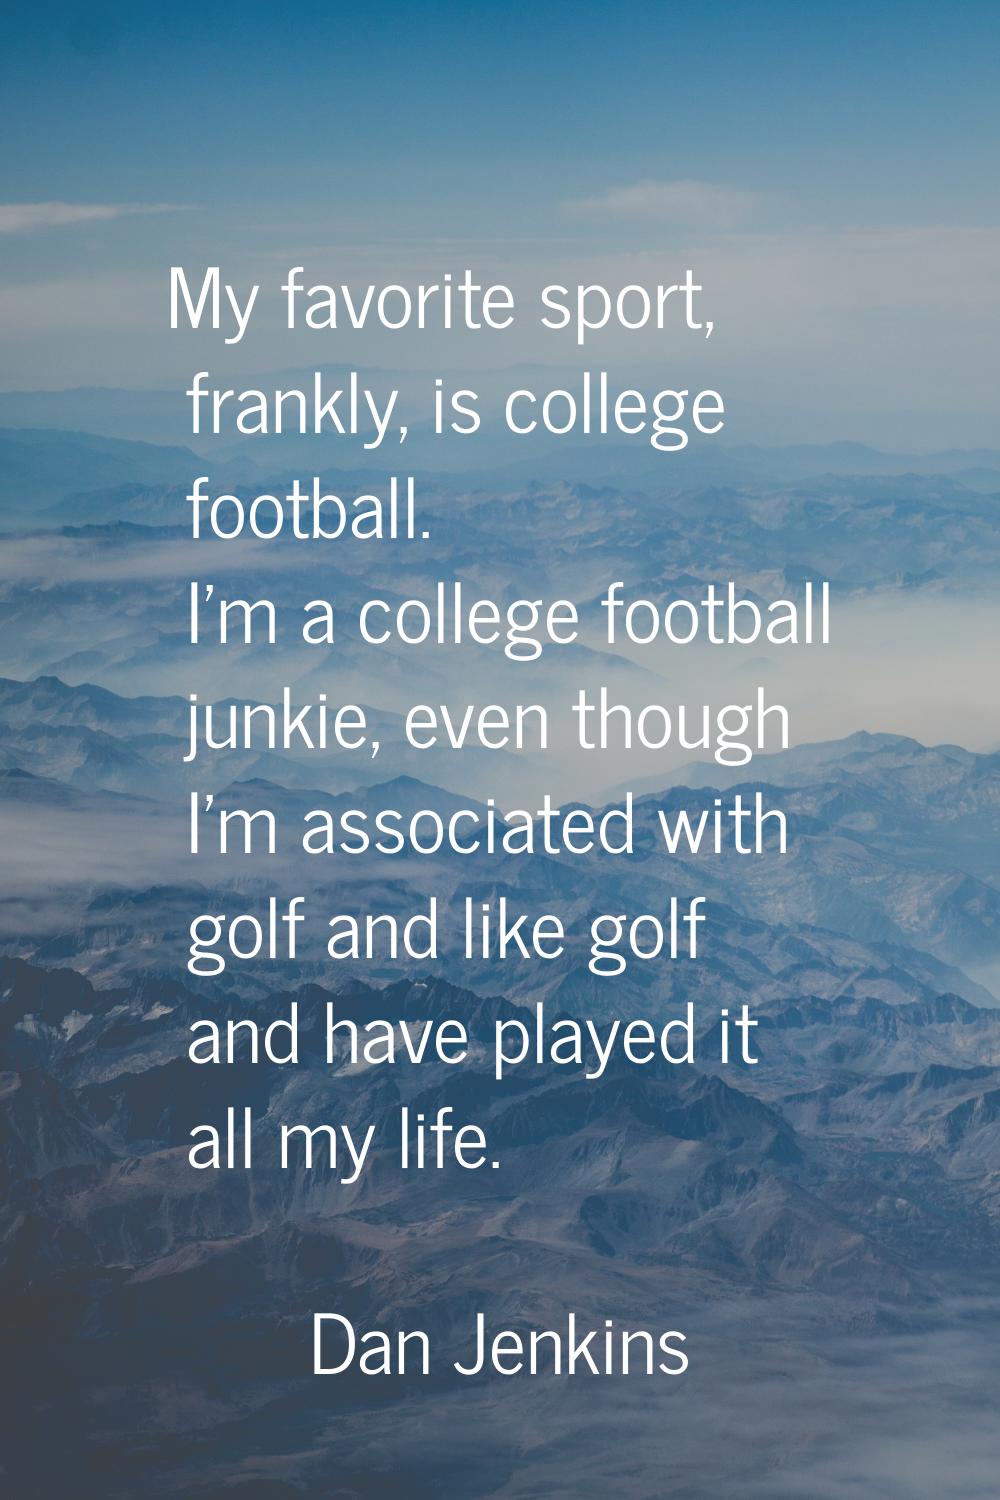 My favorite sport, frankly, is college football. I'm a college football junkie, even though I'm ass